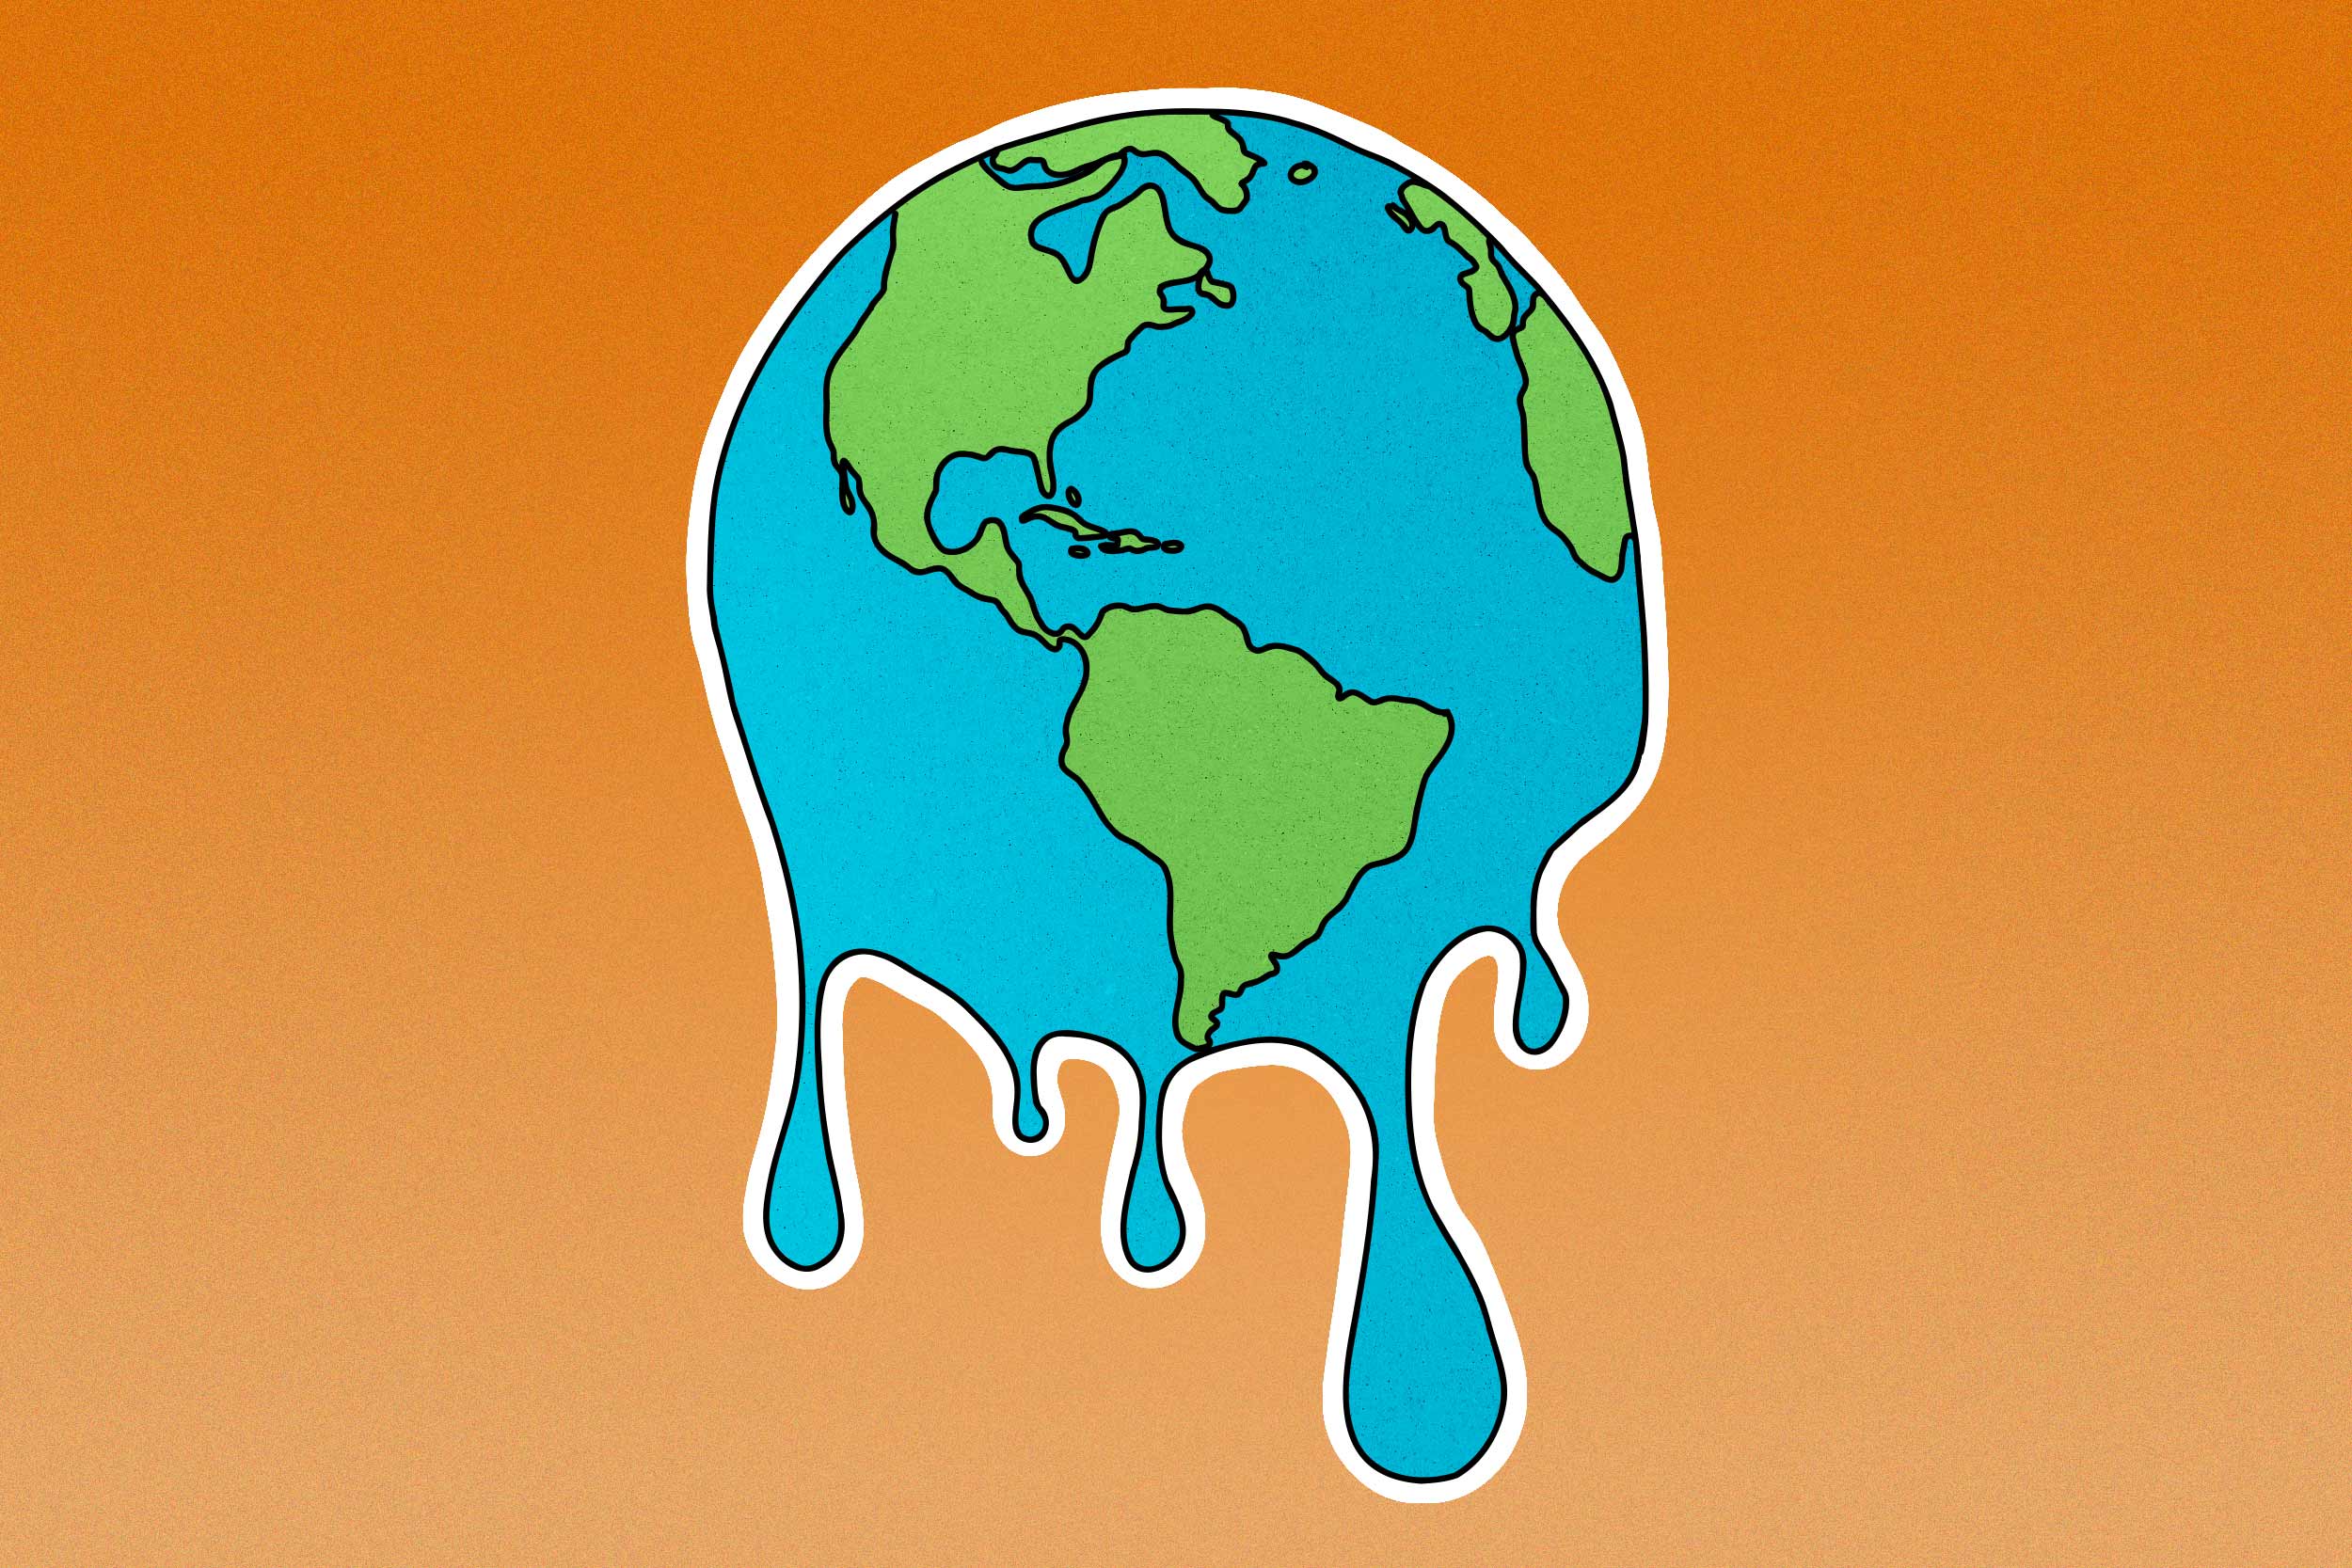 Melting Earth graphic